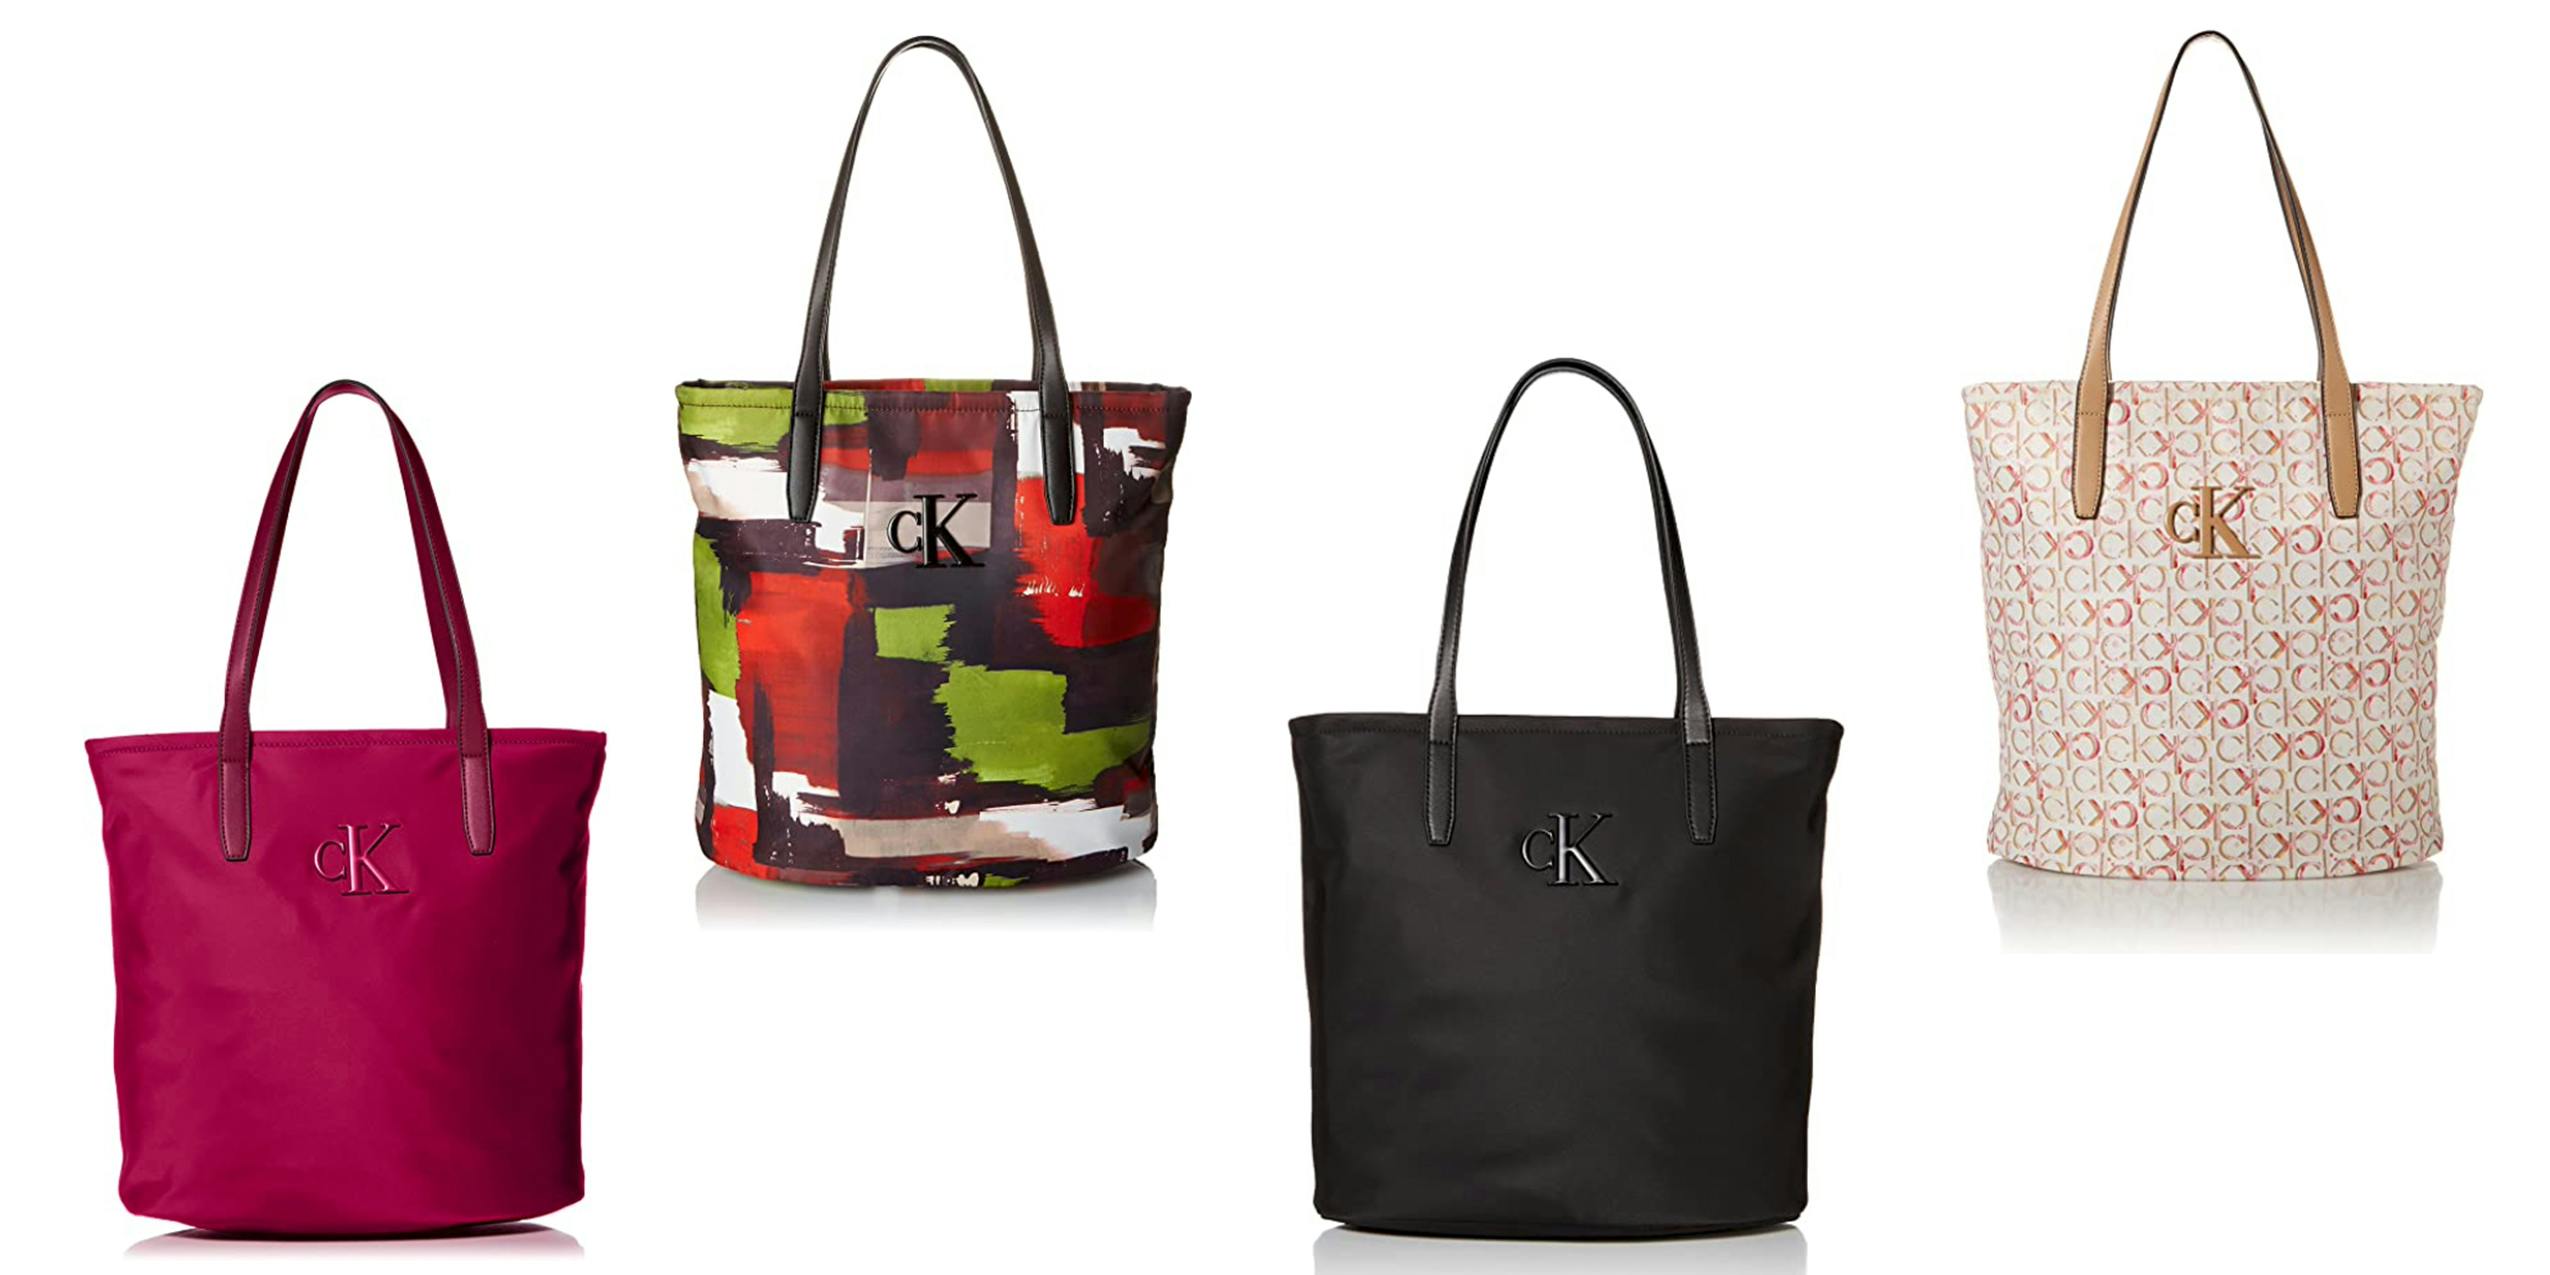 A selection of CK handbags is among one of the best gift ideas for mom.